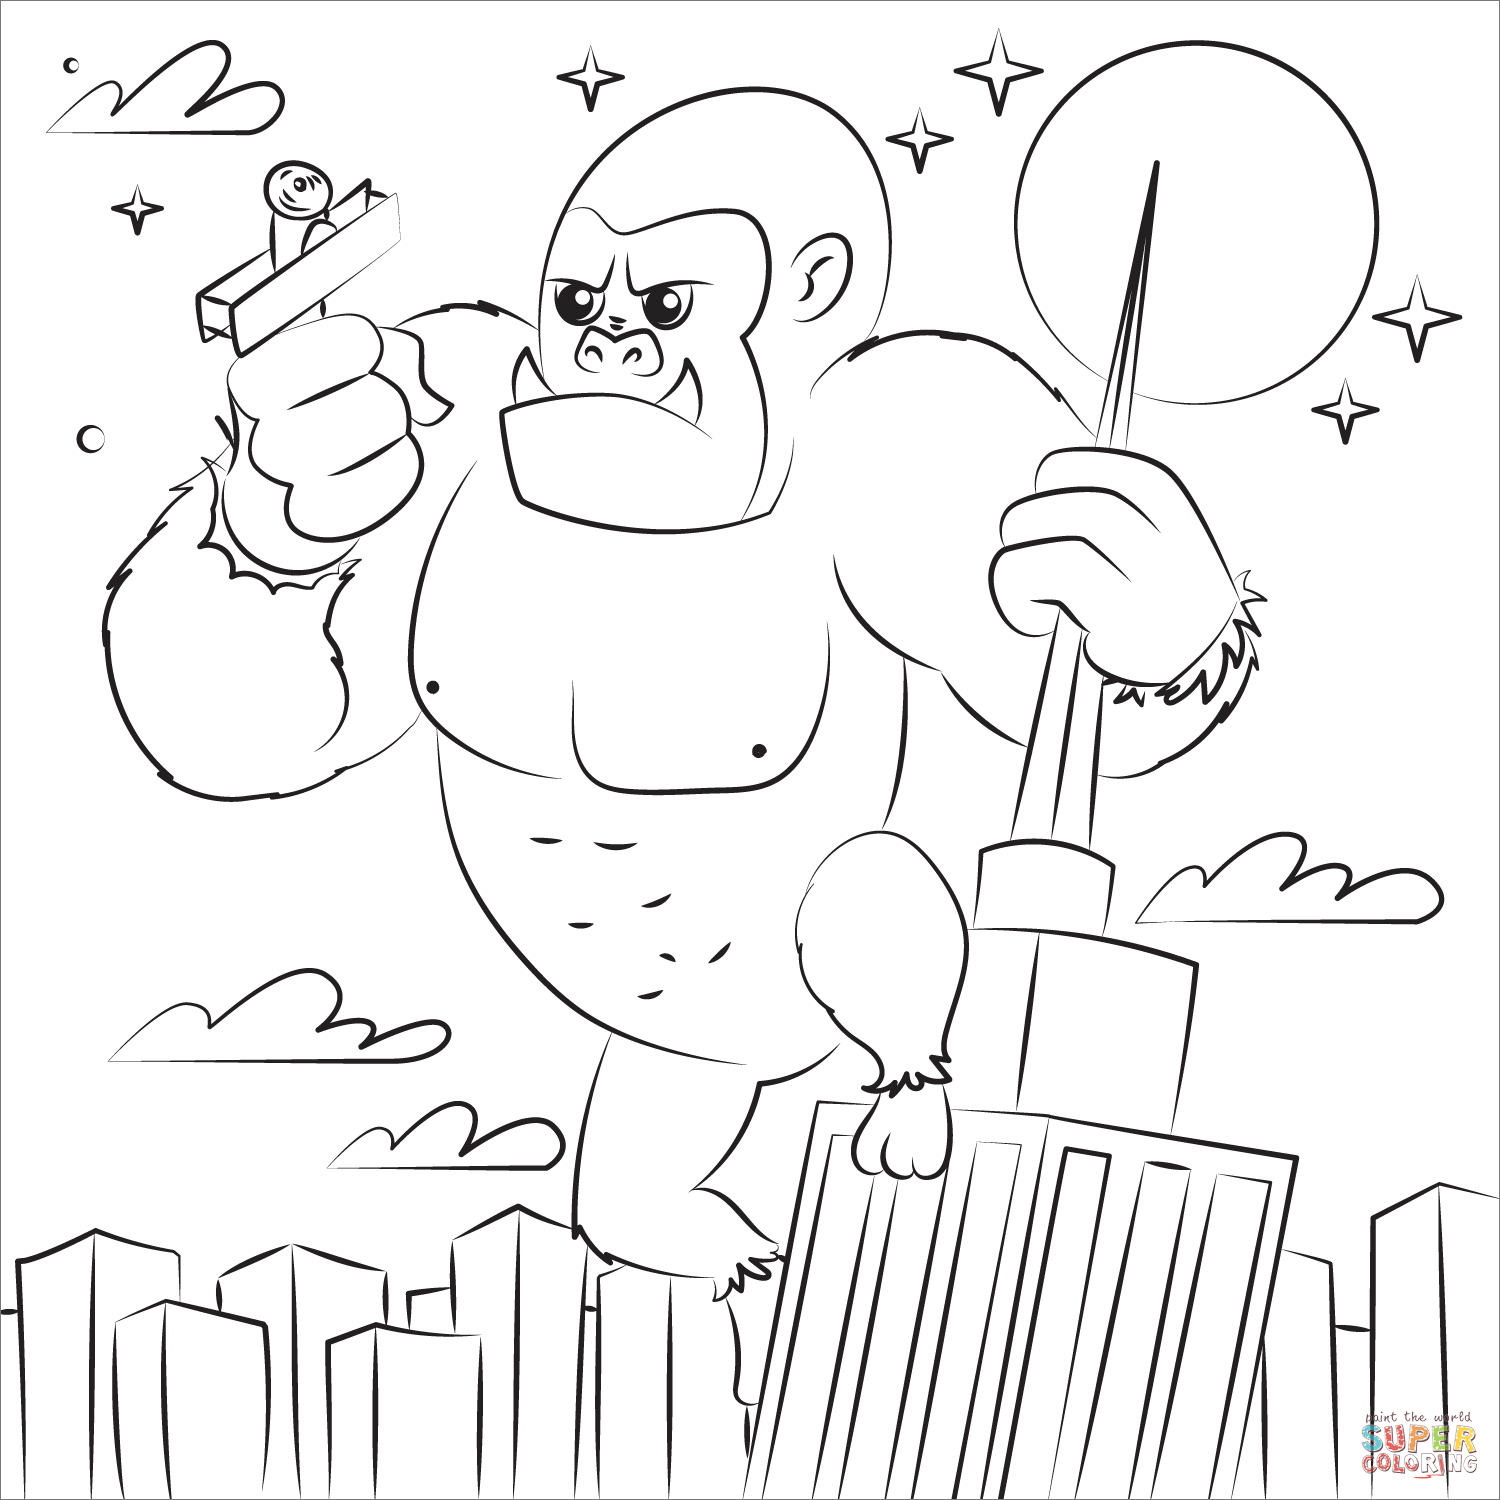 King Kong coloring page | Free Printable Coloring Pages